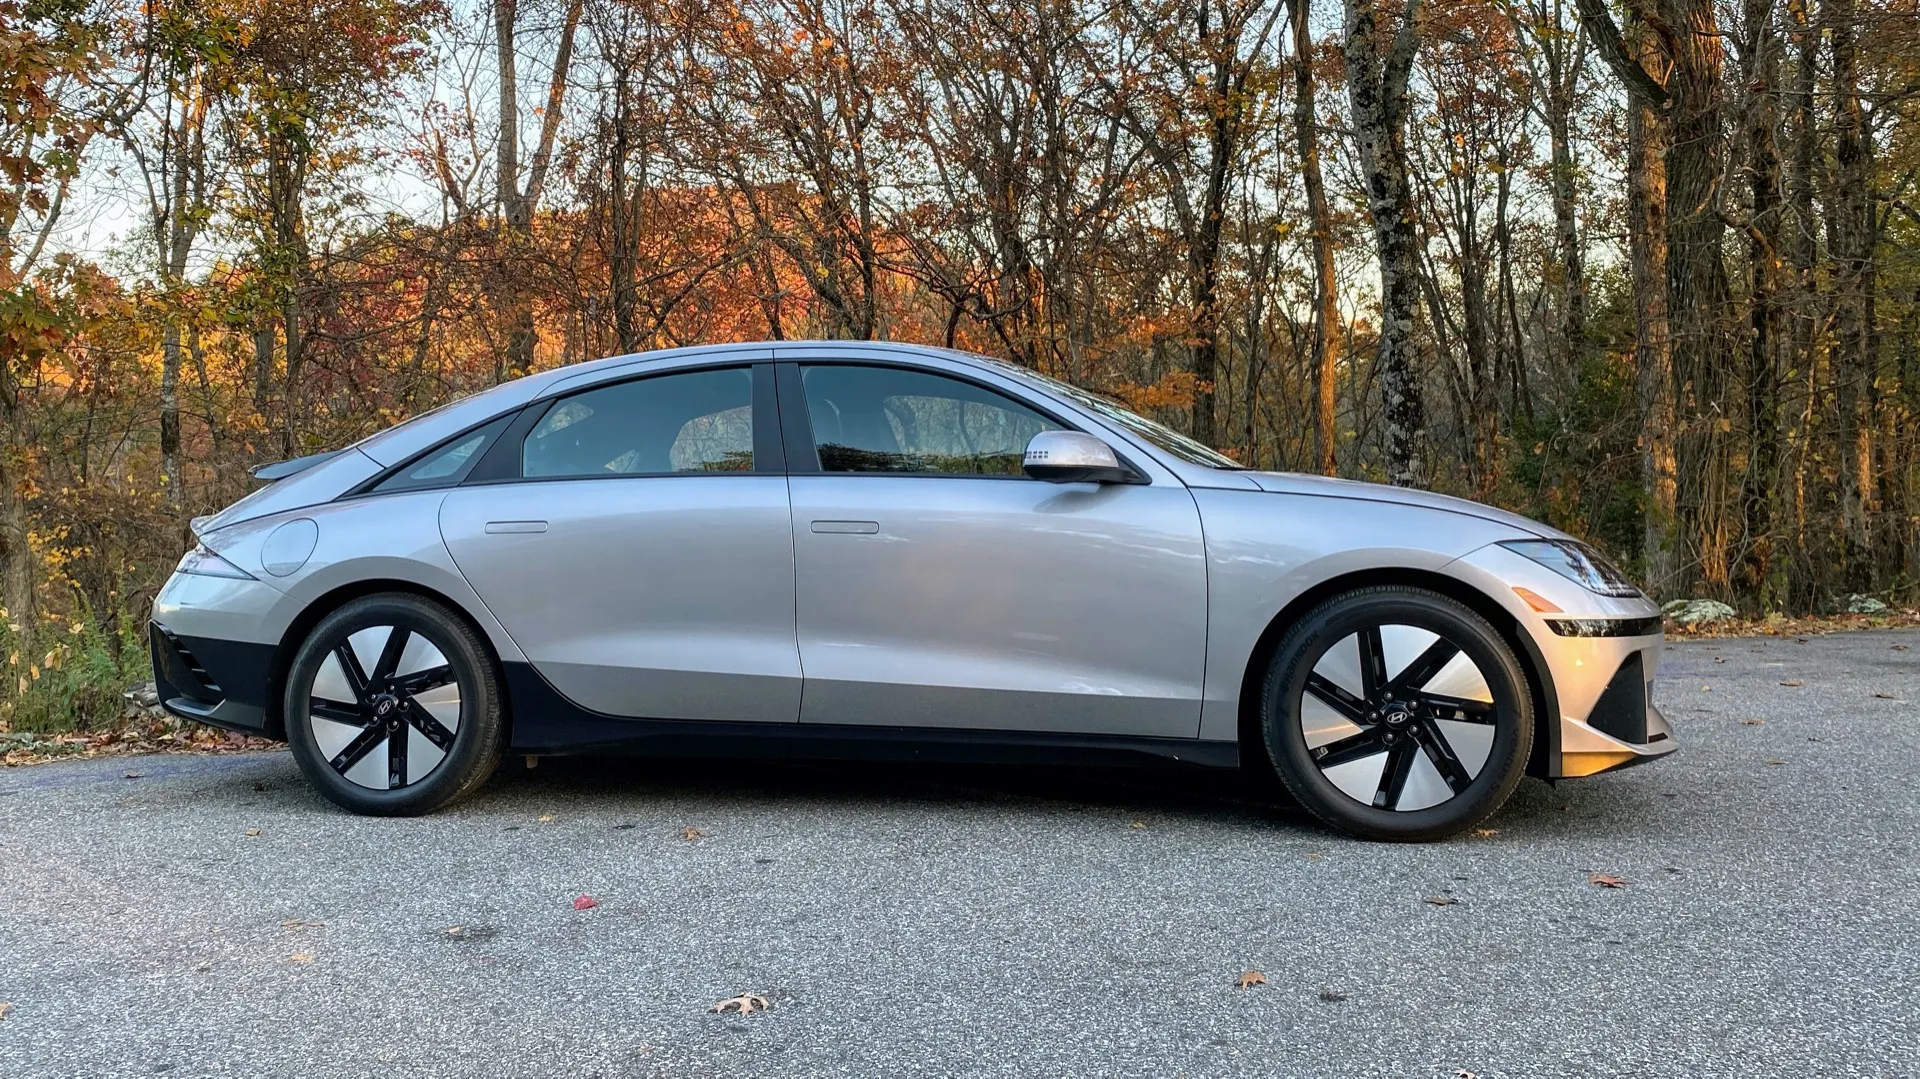 Hyundai takes on Tesla Model 3 with unveiling of its first